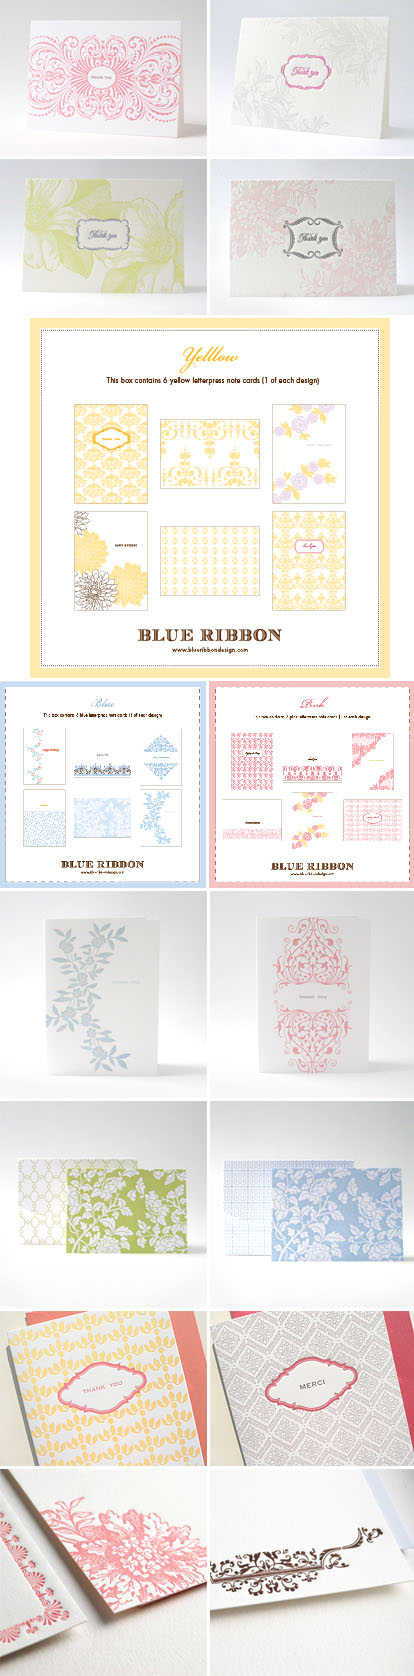 Letterpress thank-you notes and wedding invitations from Blue Ribbon Design